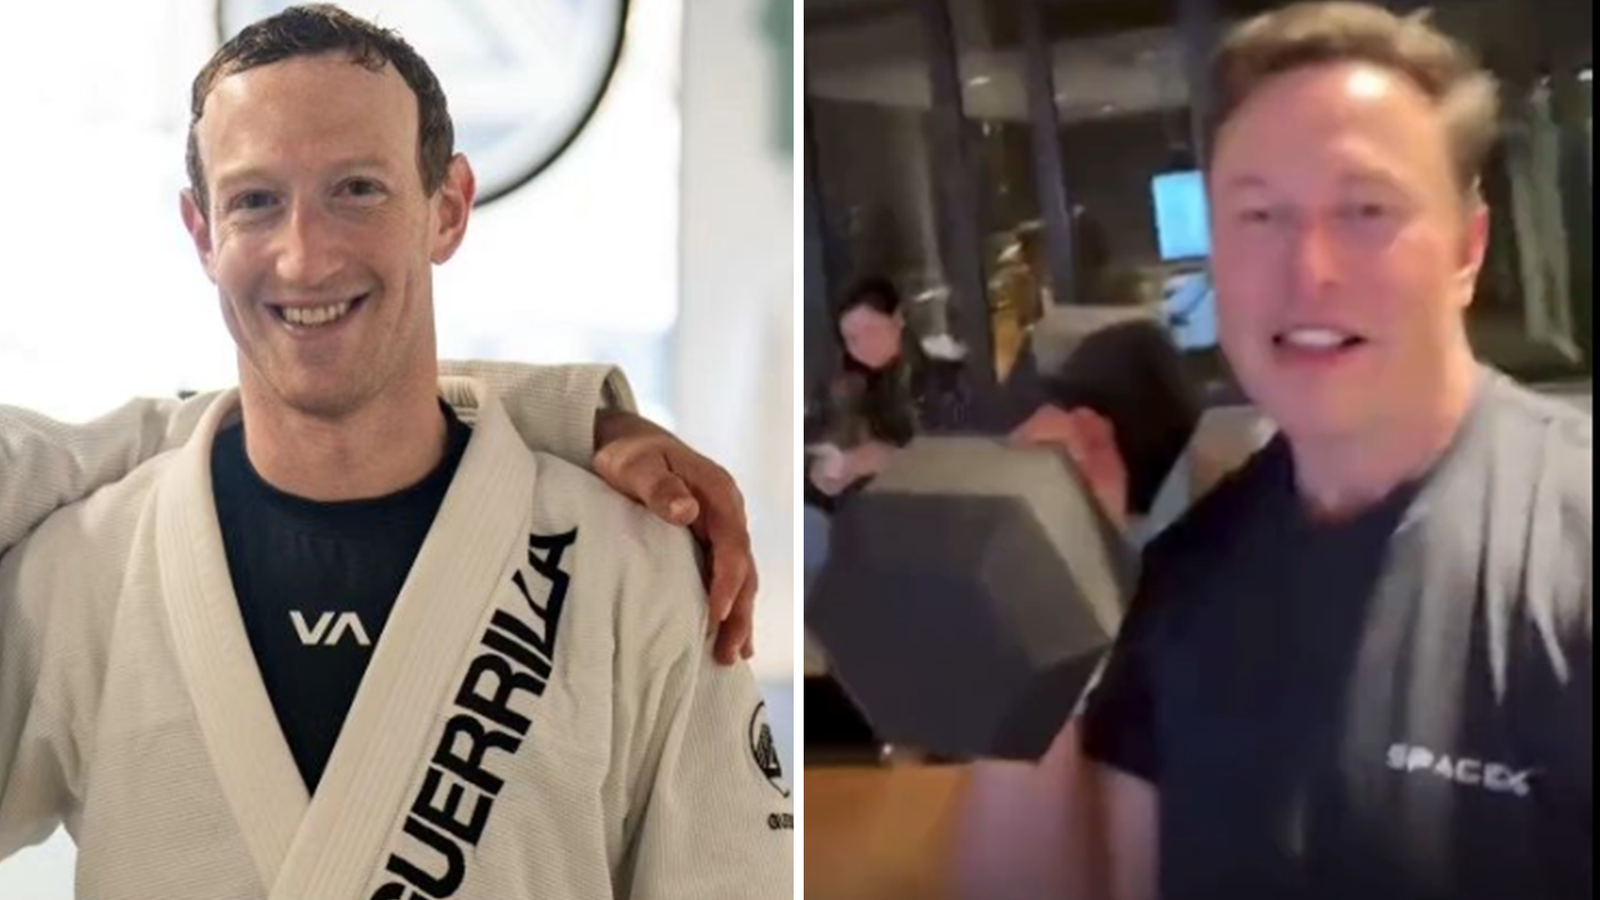 Both men are preparing for their bouts... Pics: Instagram/Zuck and X/ElonMusk